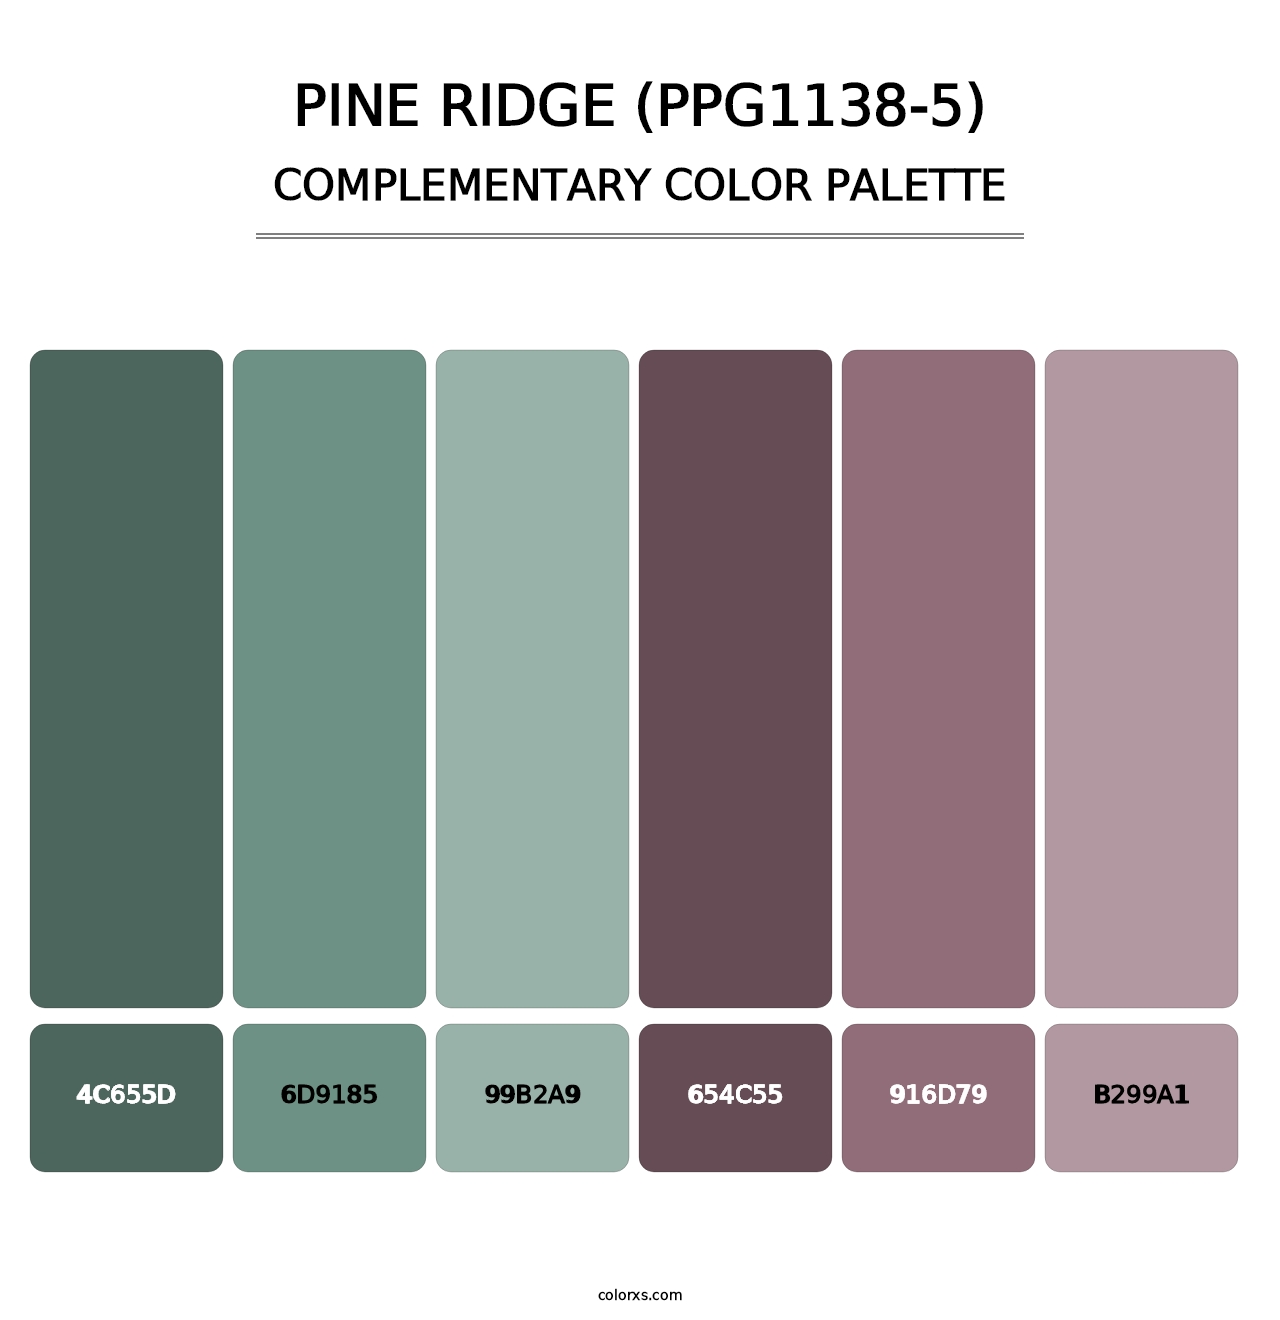 Pine Ridge (PPG1138-5) - Complementary Color Palette